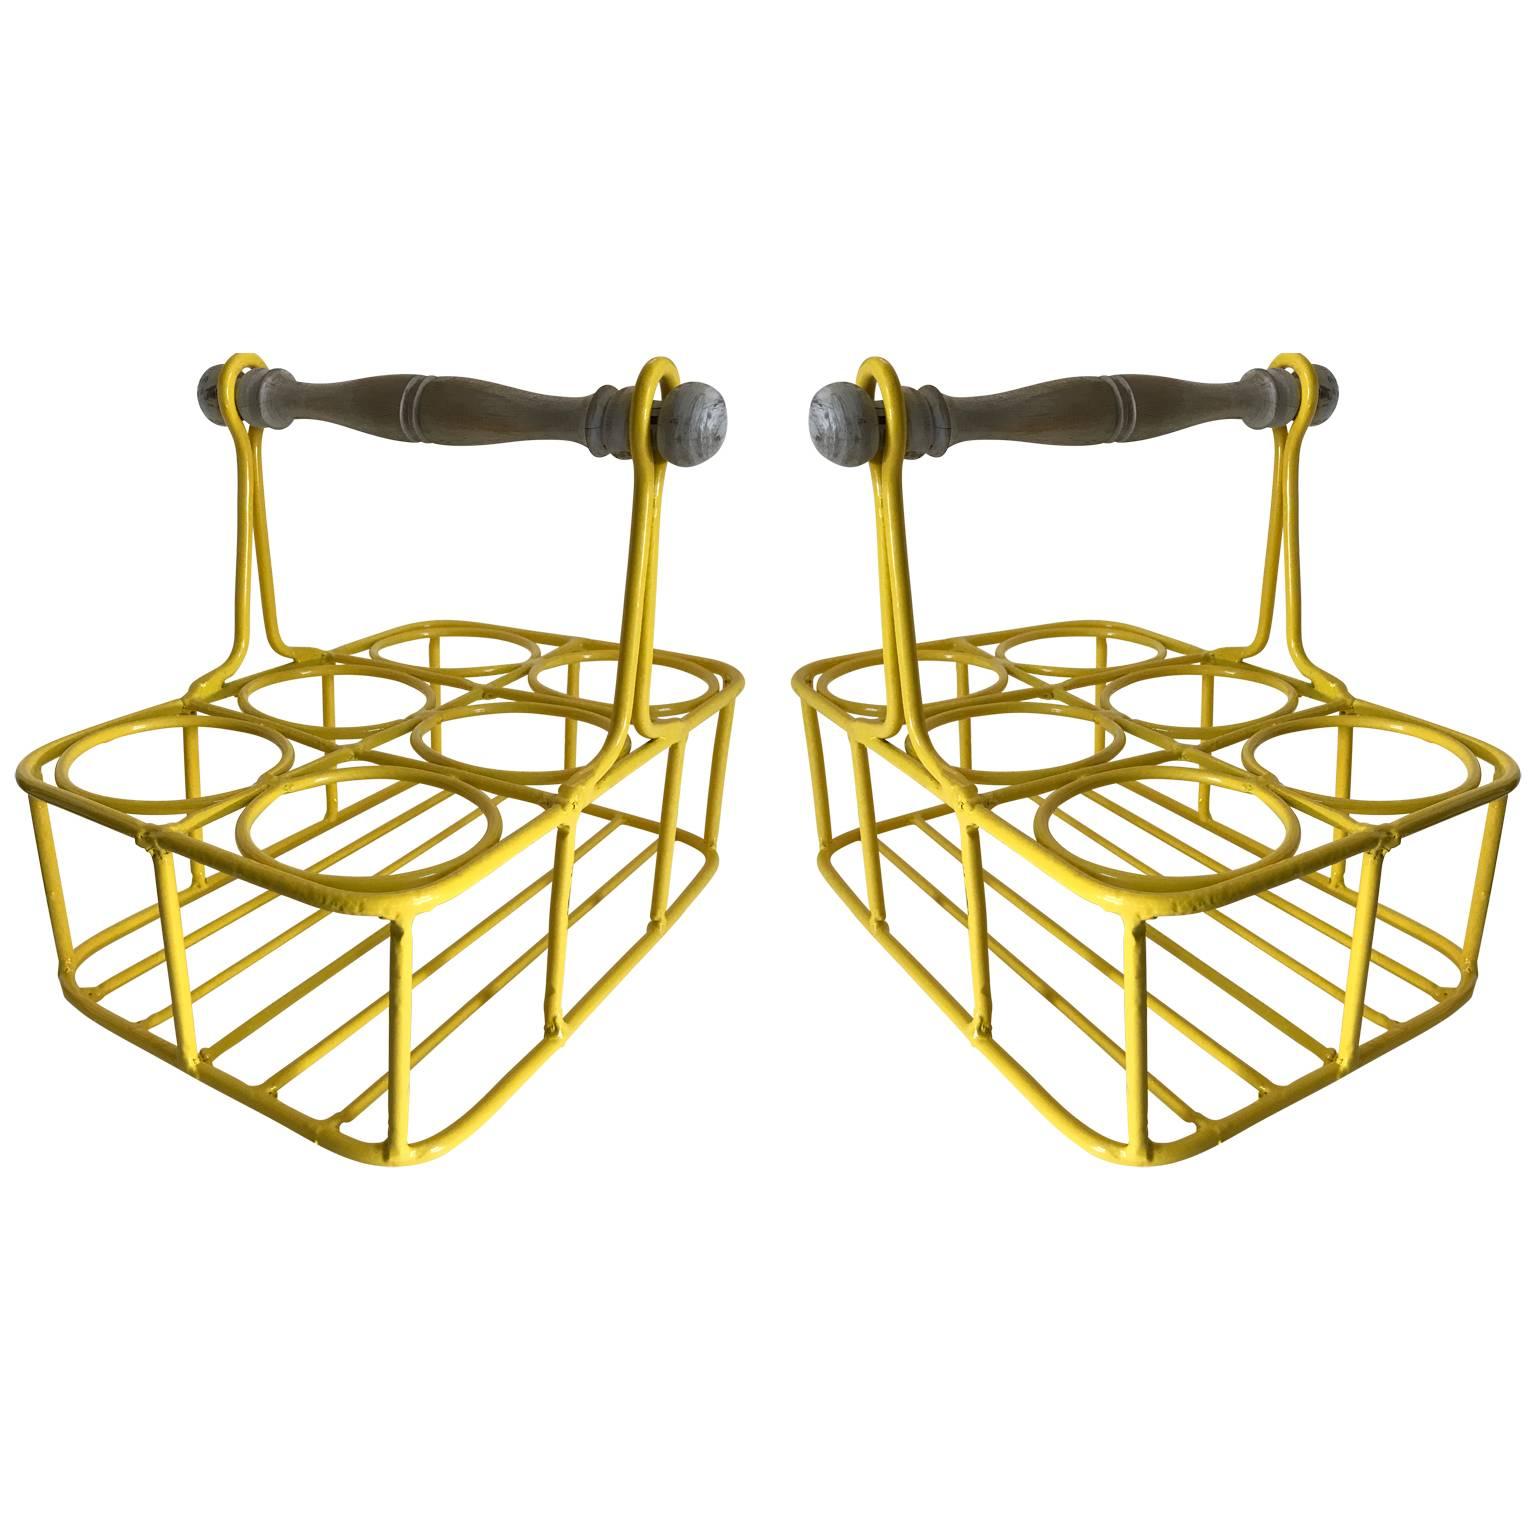 20th Century Set of Two Wine Racks or Planters in Bright Sunshine Yellow